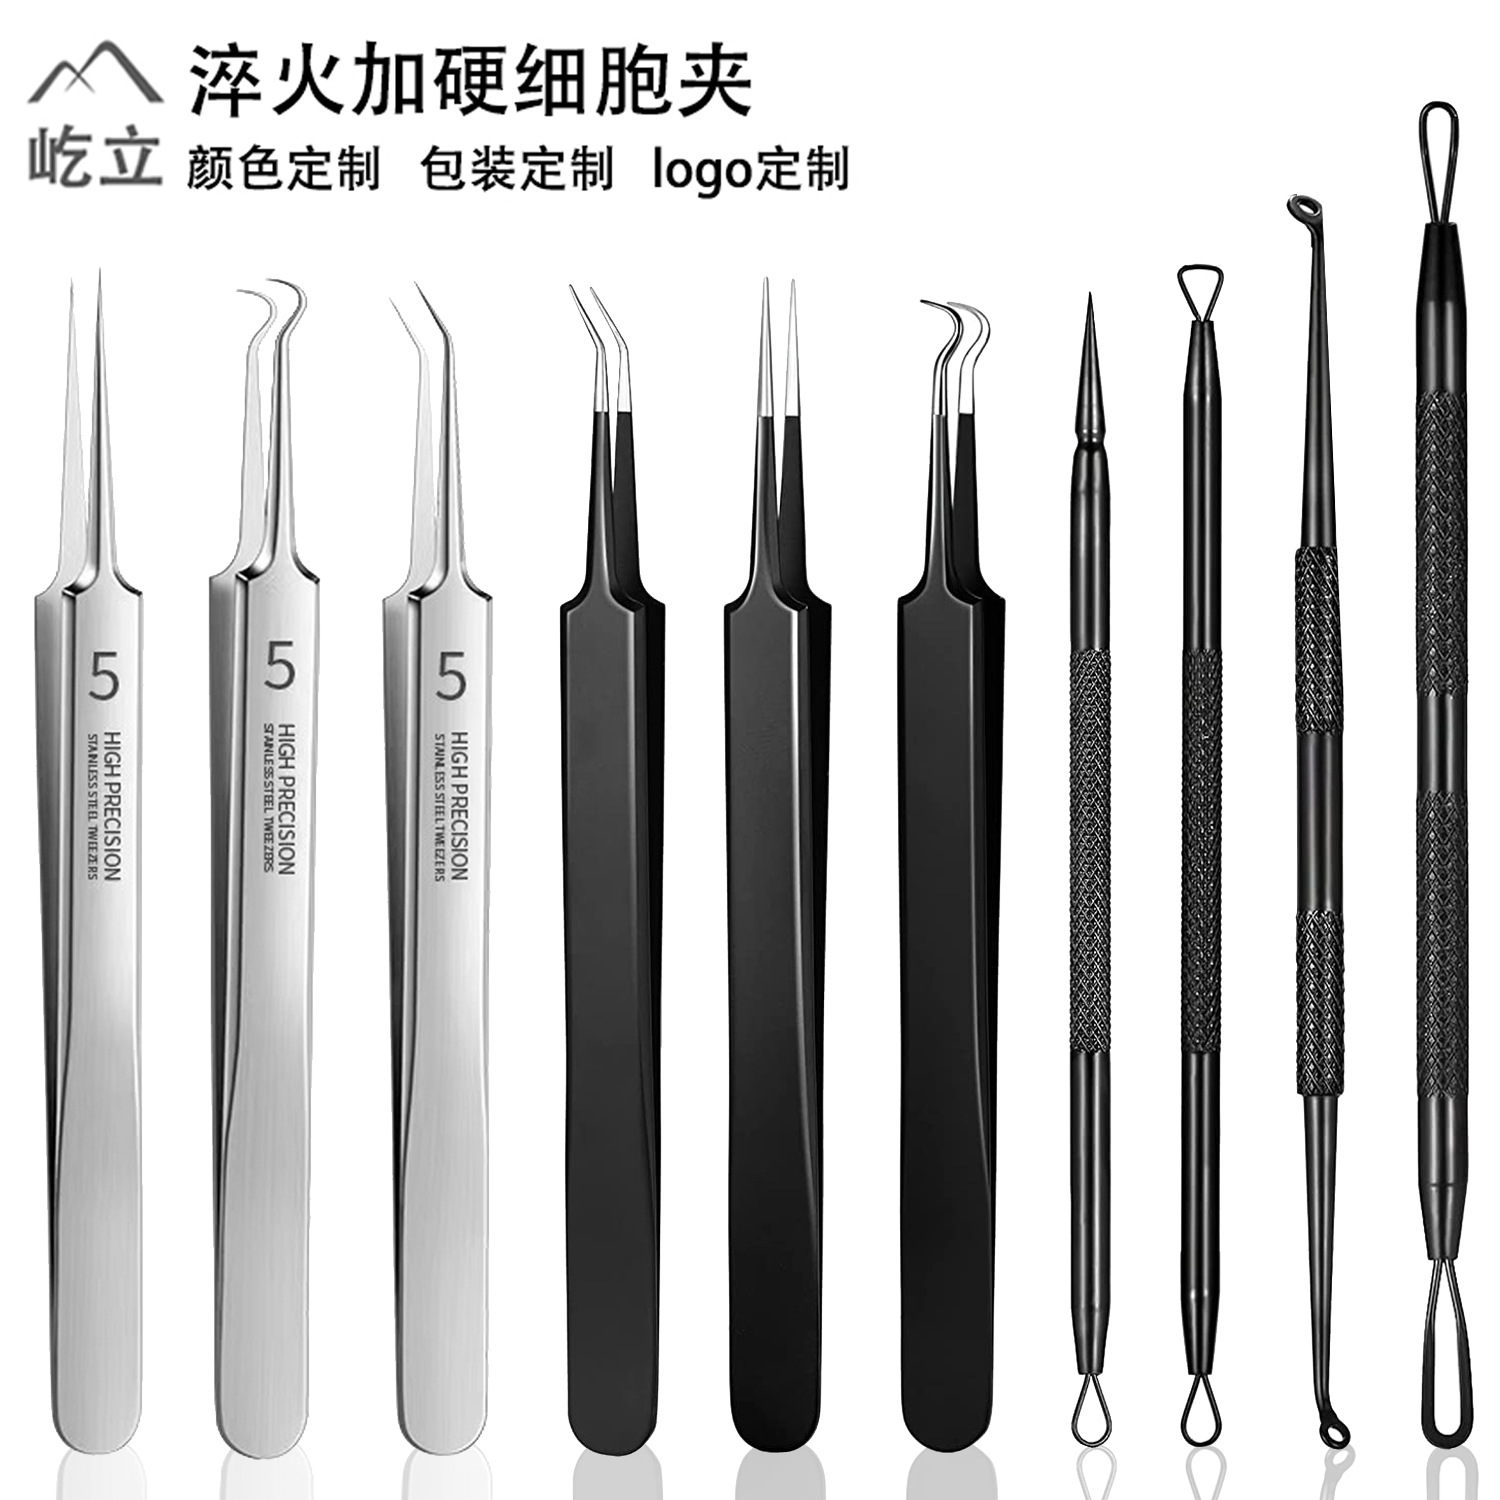 Heat Treatment Cell Acne clip Cell Blackhead Acne needle stainless steel Tweezers tool 5